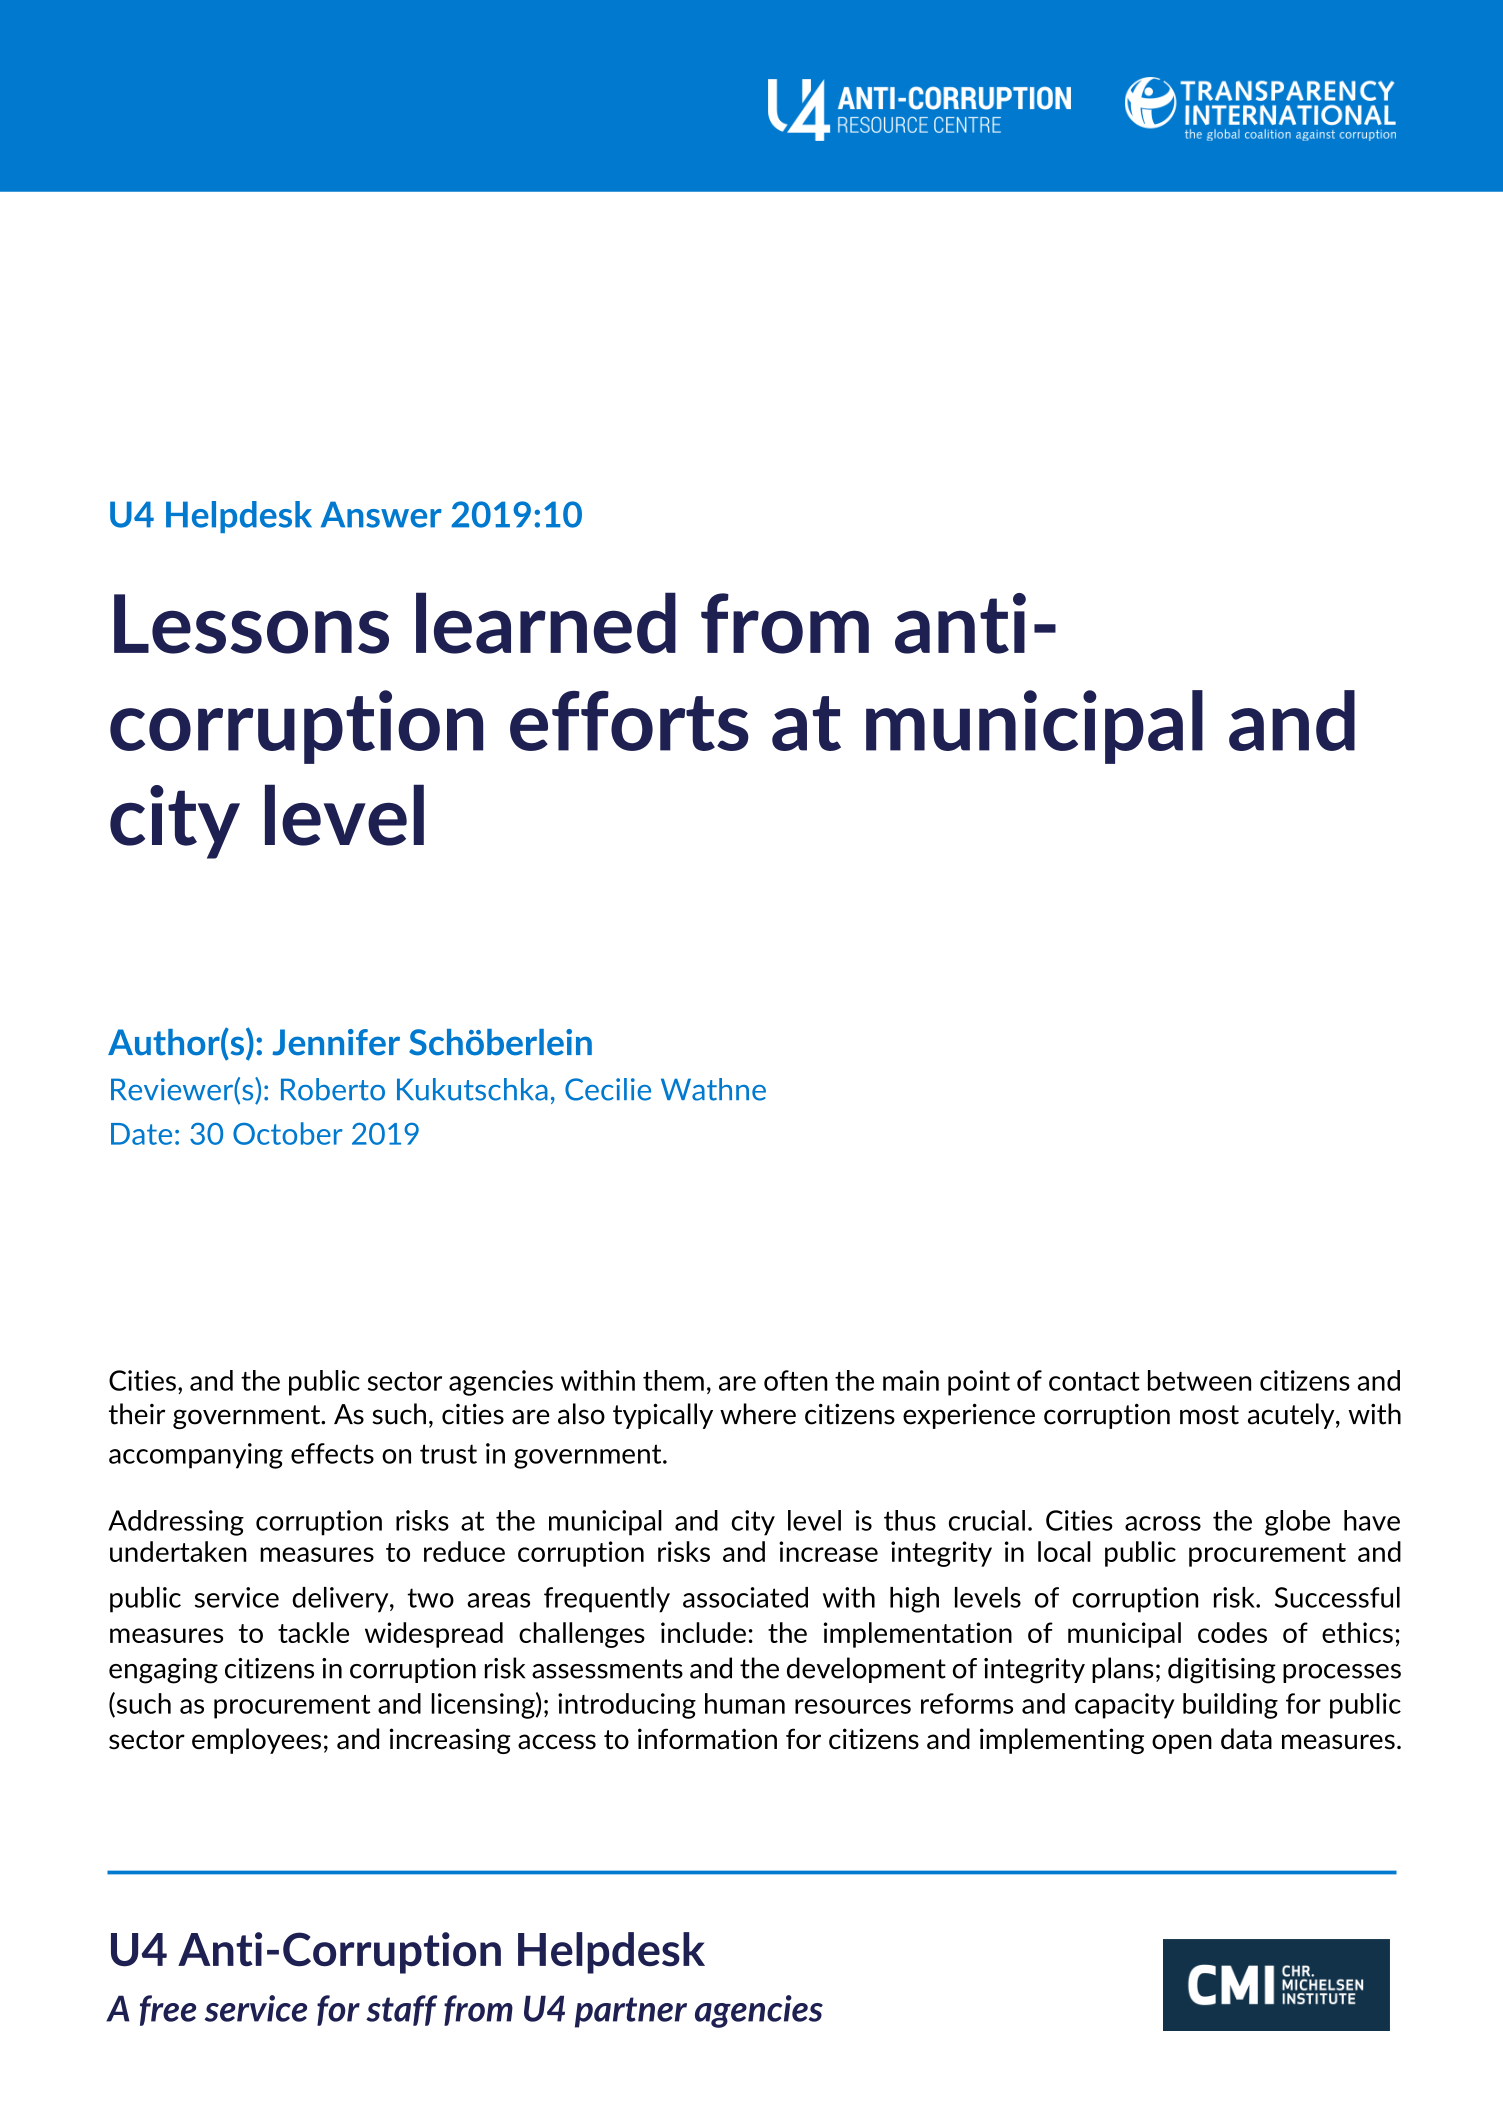 Lessons learned from anti-corruption efforts at municipal and city level